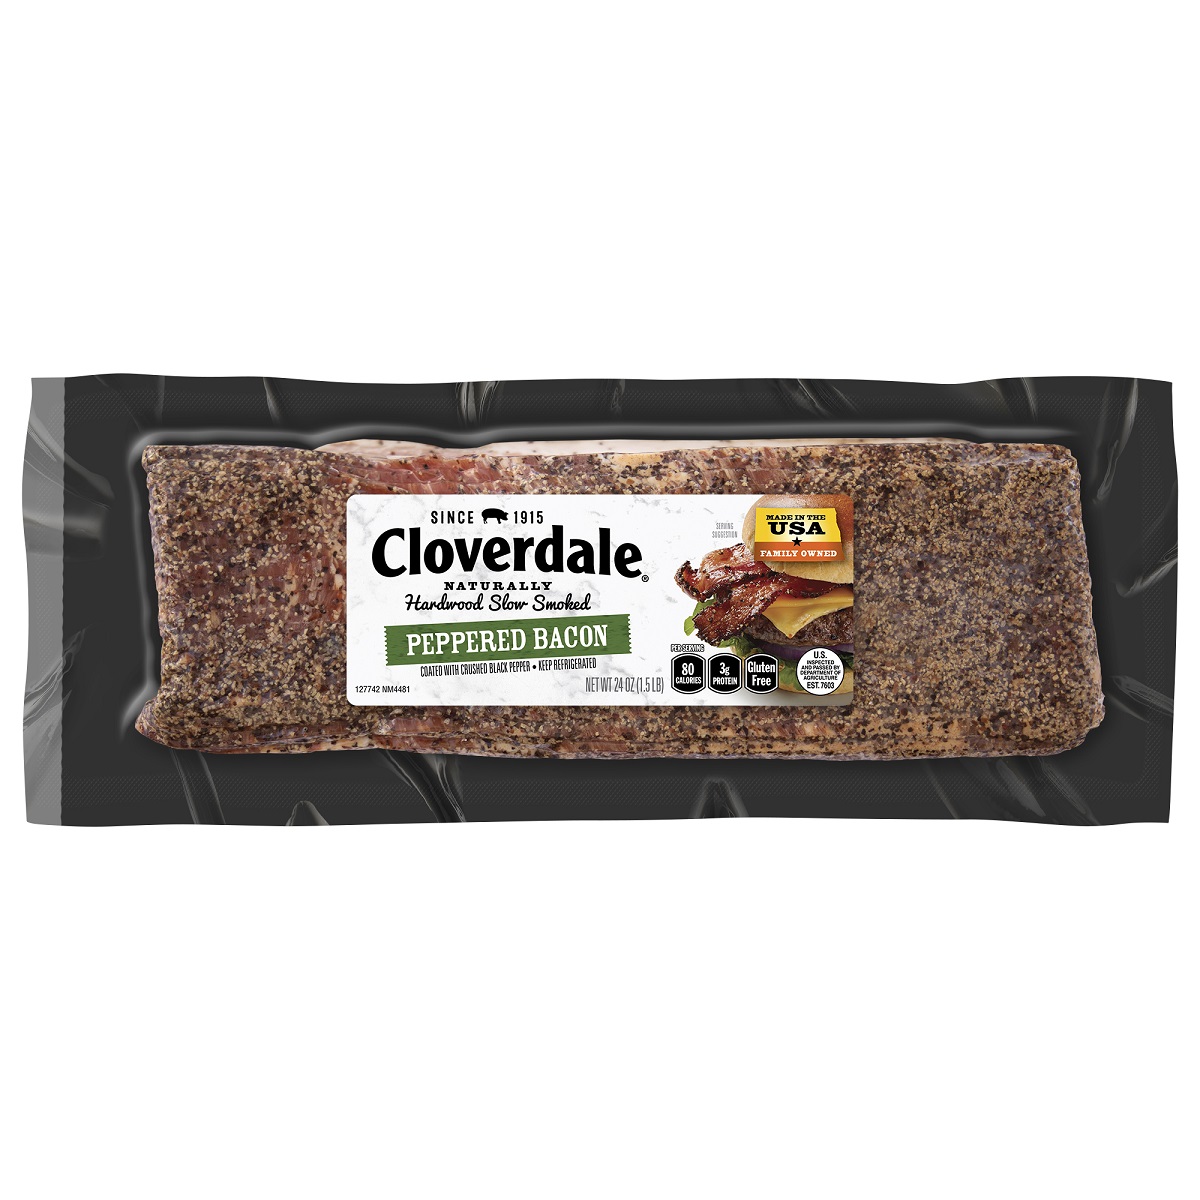 CLOVERDALE SMOKED PEPPERED BACON